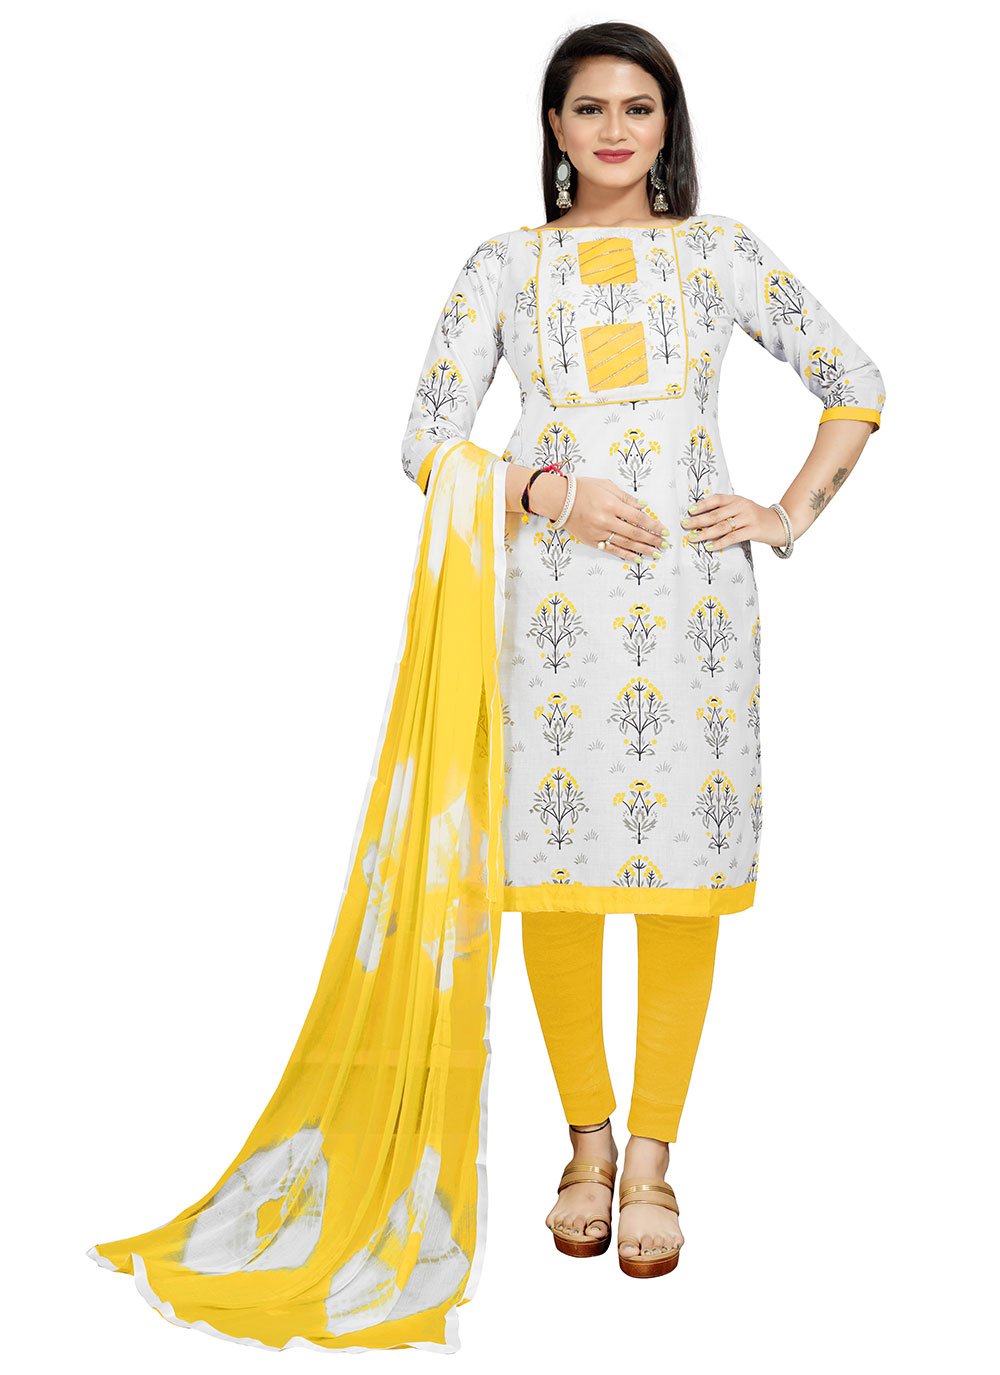 Off White and Yellow Cotton Festival Churidar Suit